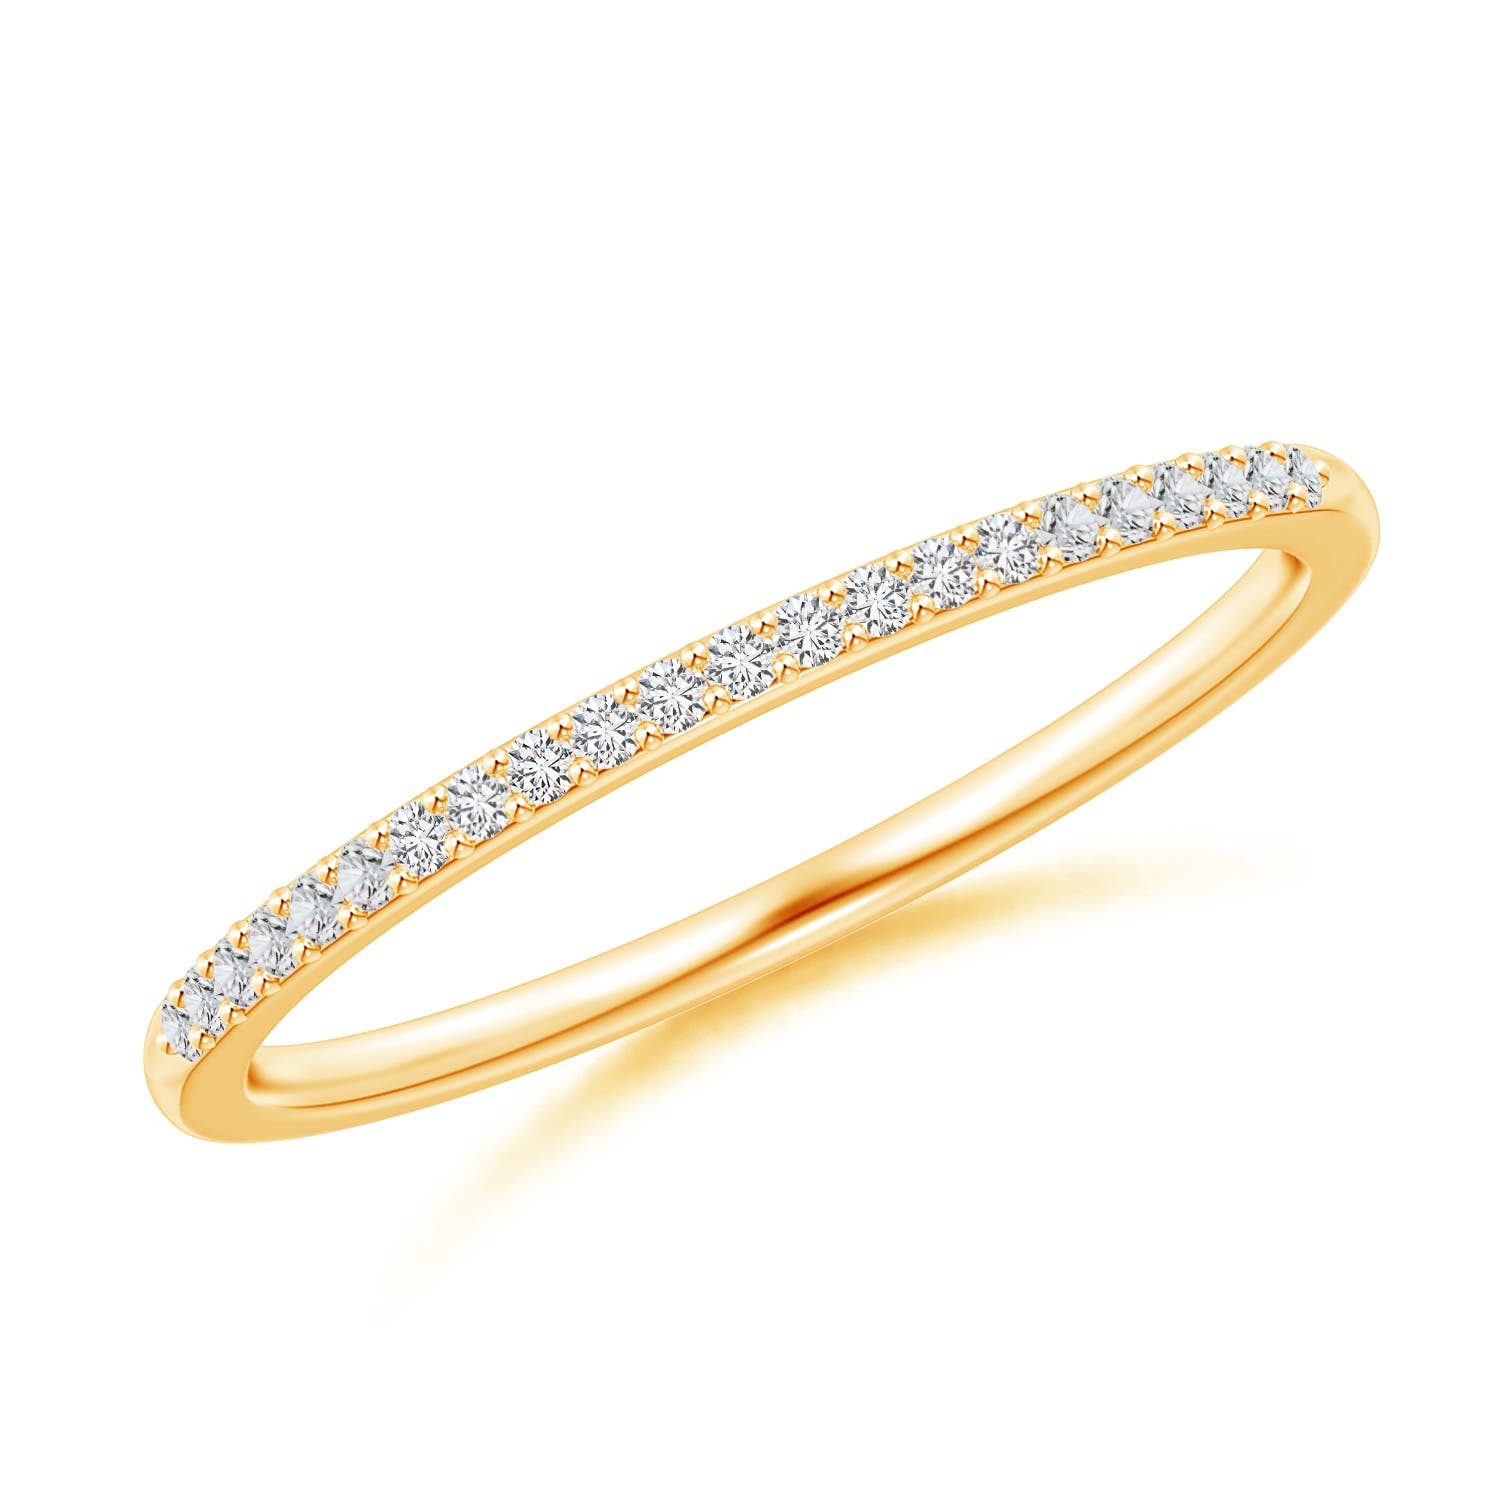 H, SI2 / 0.13 CT / 14 KT Yellow Gold